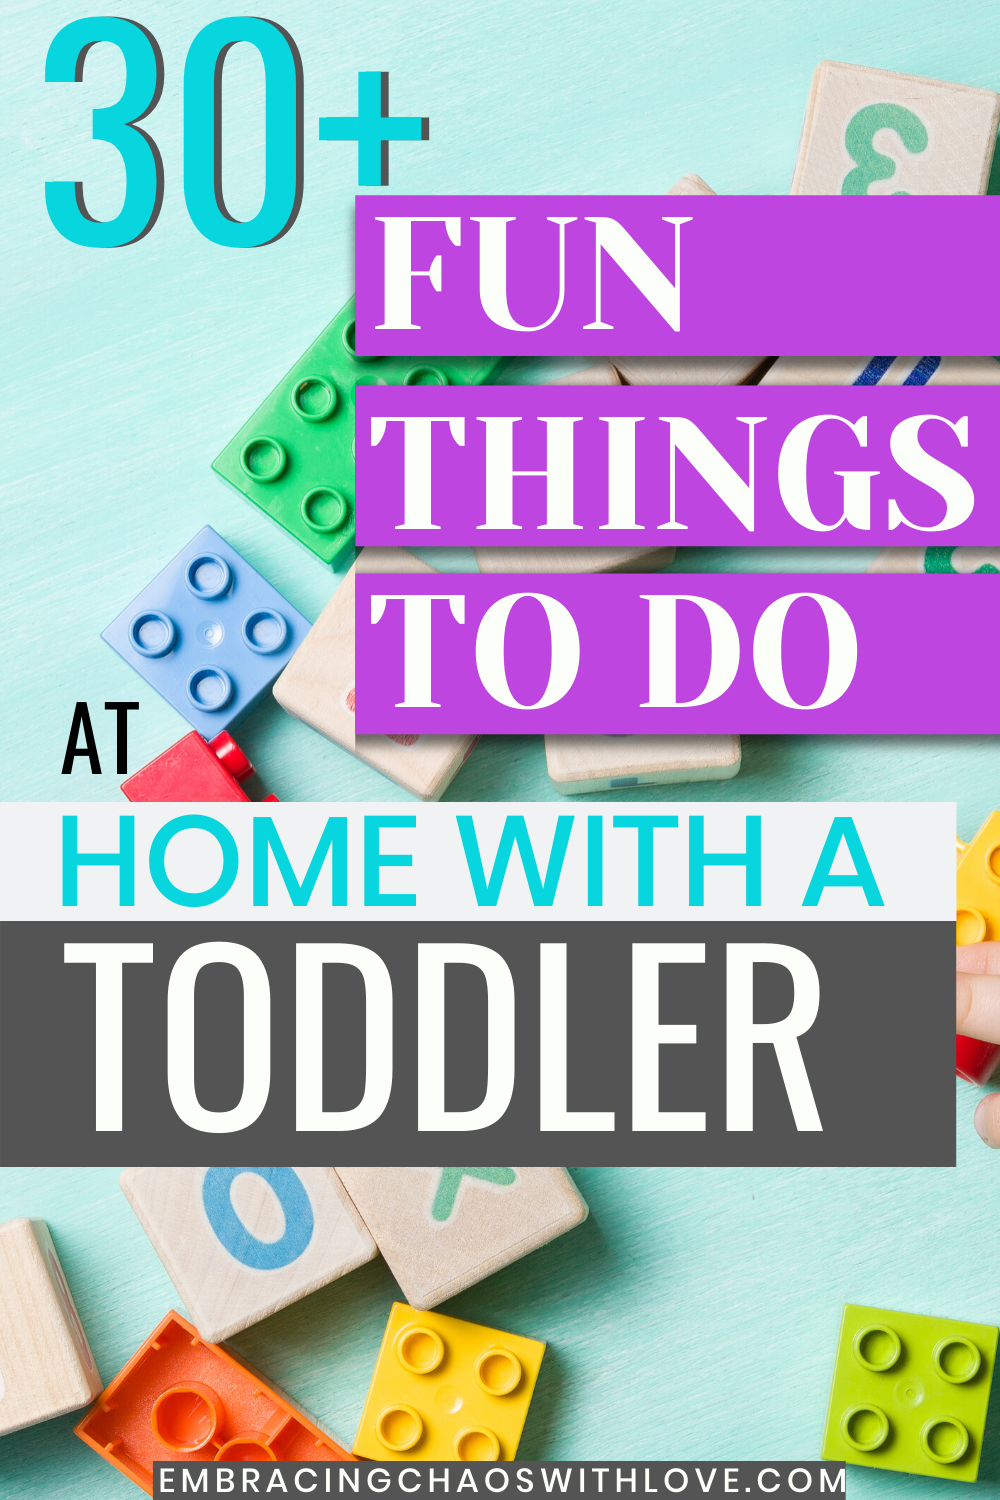 Activities To Do With Toddlers At Home Embracing Chaos With Love